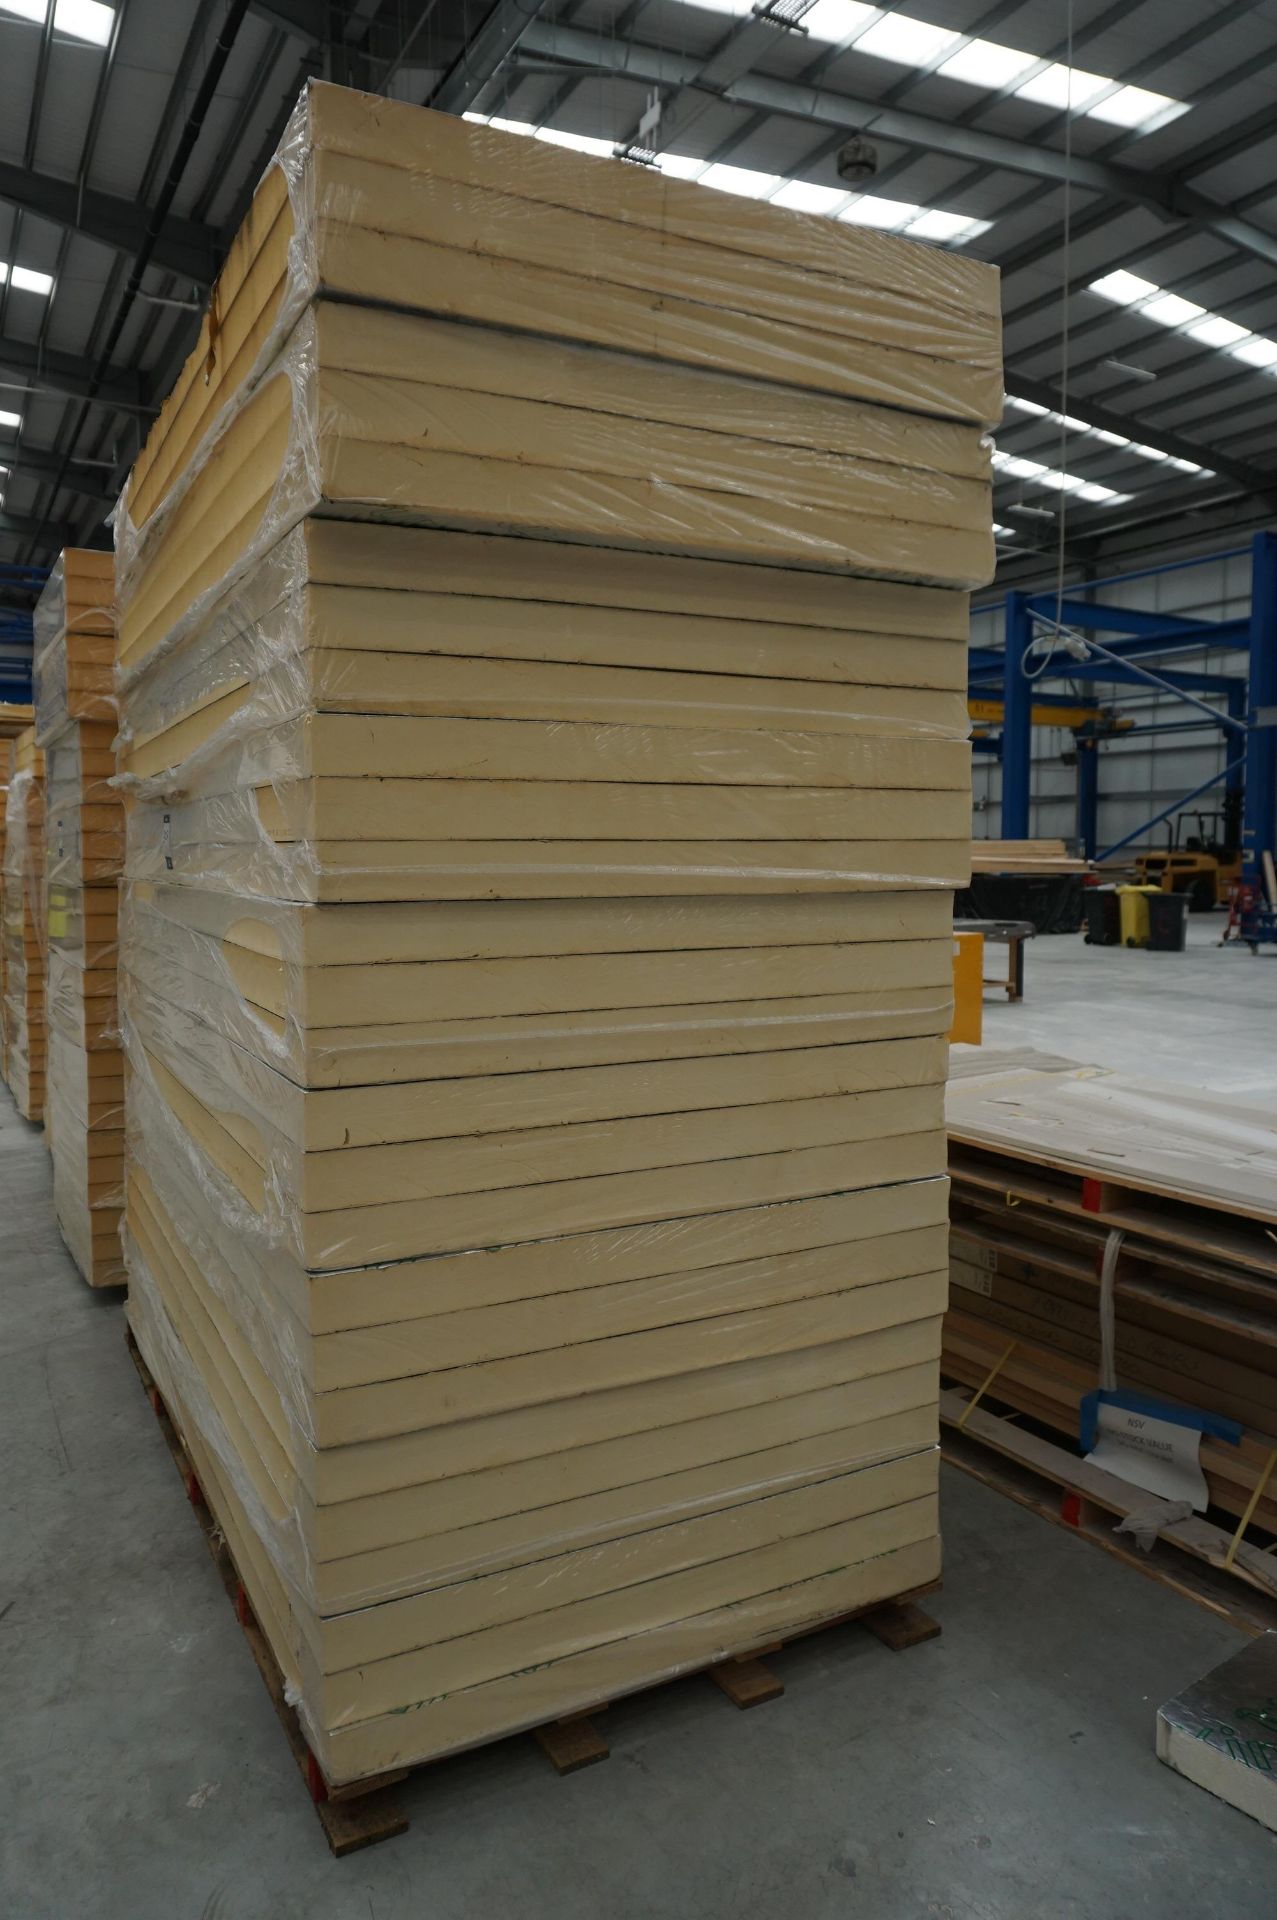 27x (no.) Kingspan, Therma TP10 insulation boards, 1200 x 2400 x 90mm - Image 2 of 4